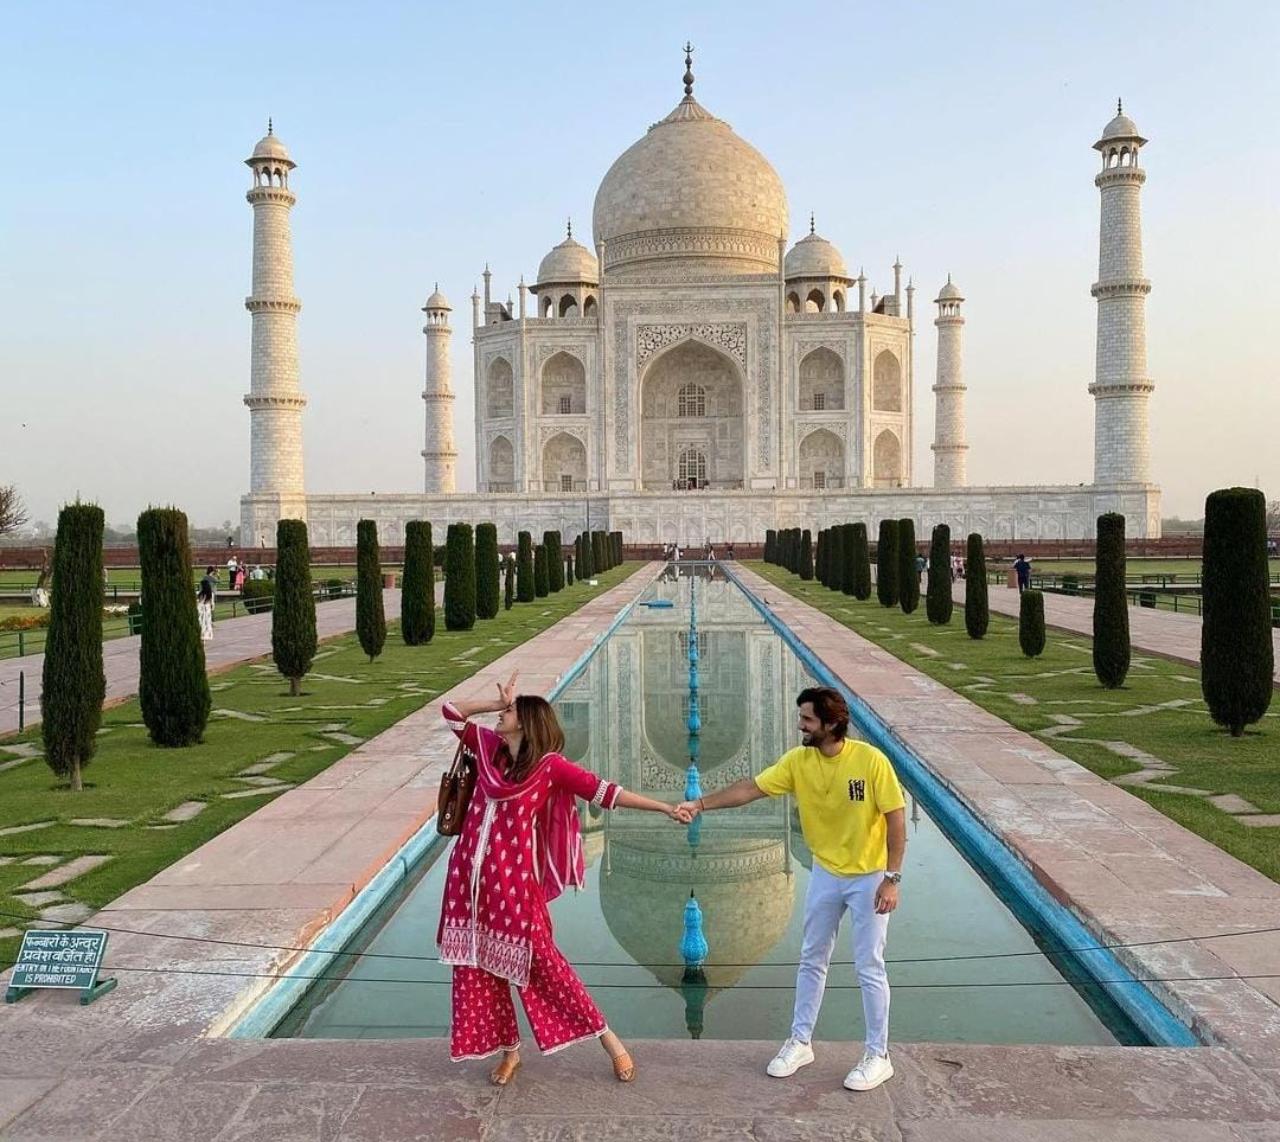 A symbol of love is exactly what Aditya and Anushka are, as the couple have a romantic getaway in front of one of the Seven wonders of the world Taj Mahal. The couple is seen wearing semi causal outfits as they hold their hands in a cute yet dramatic way showing their loving moments together.